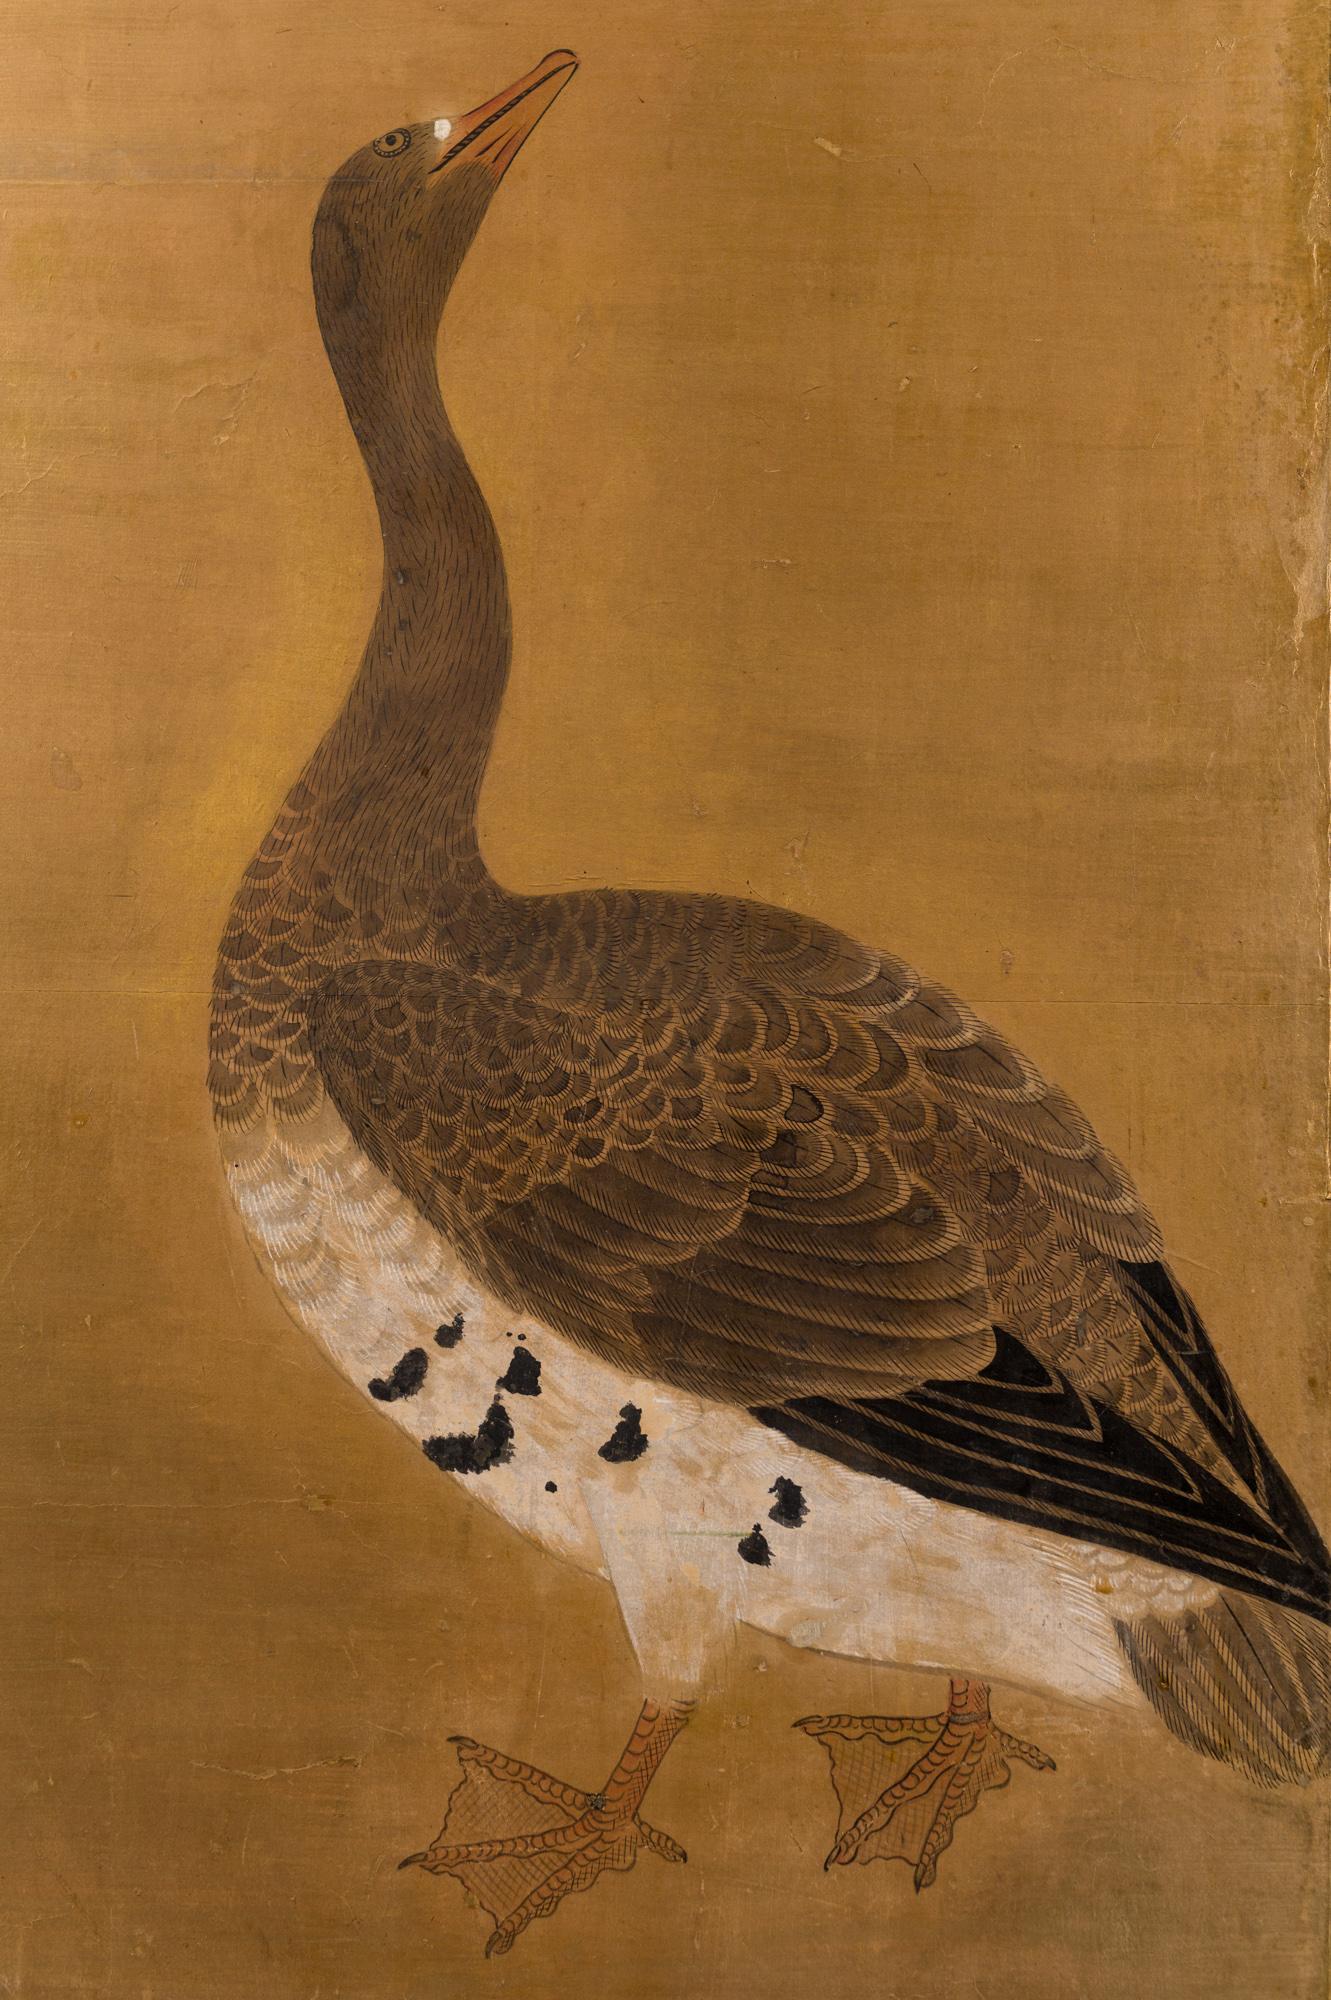 Japanese two panel screen: Geese on Gold, Edo period (circa 1800) painting of a pair of geese with wonderfully detailed feathers on a soft gold ground. Painted in mineral pigments on paper with a silver leaf border, black lacquer frame, and very